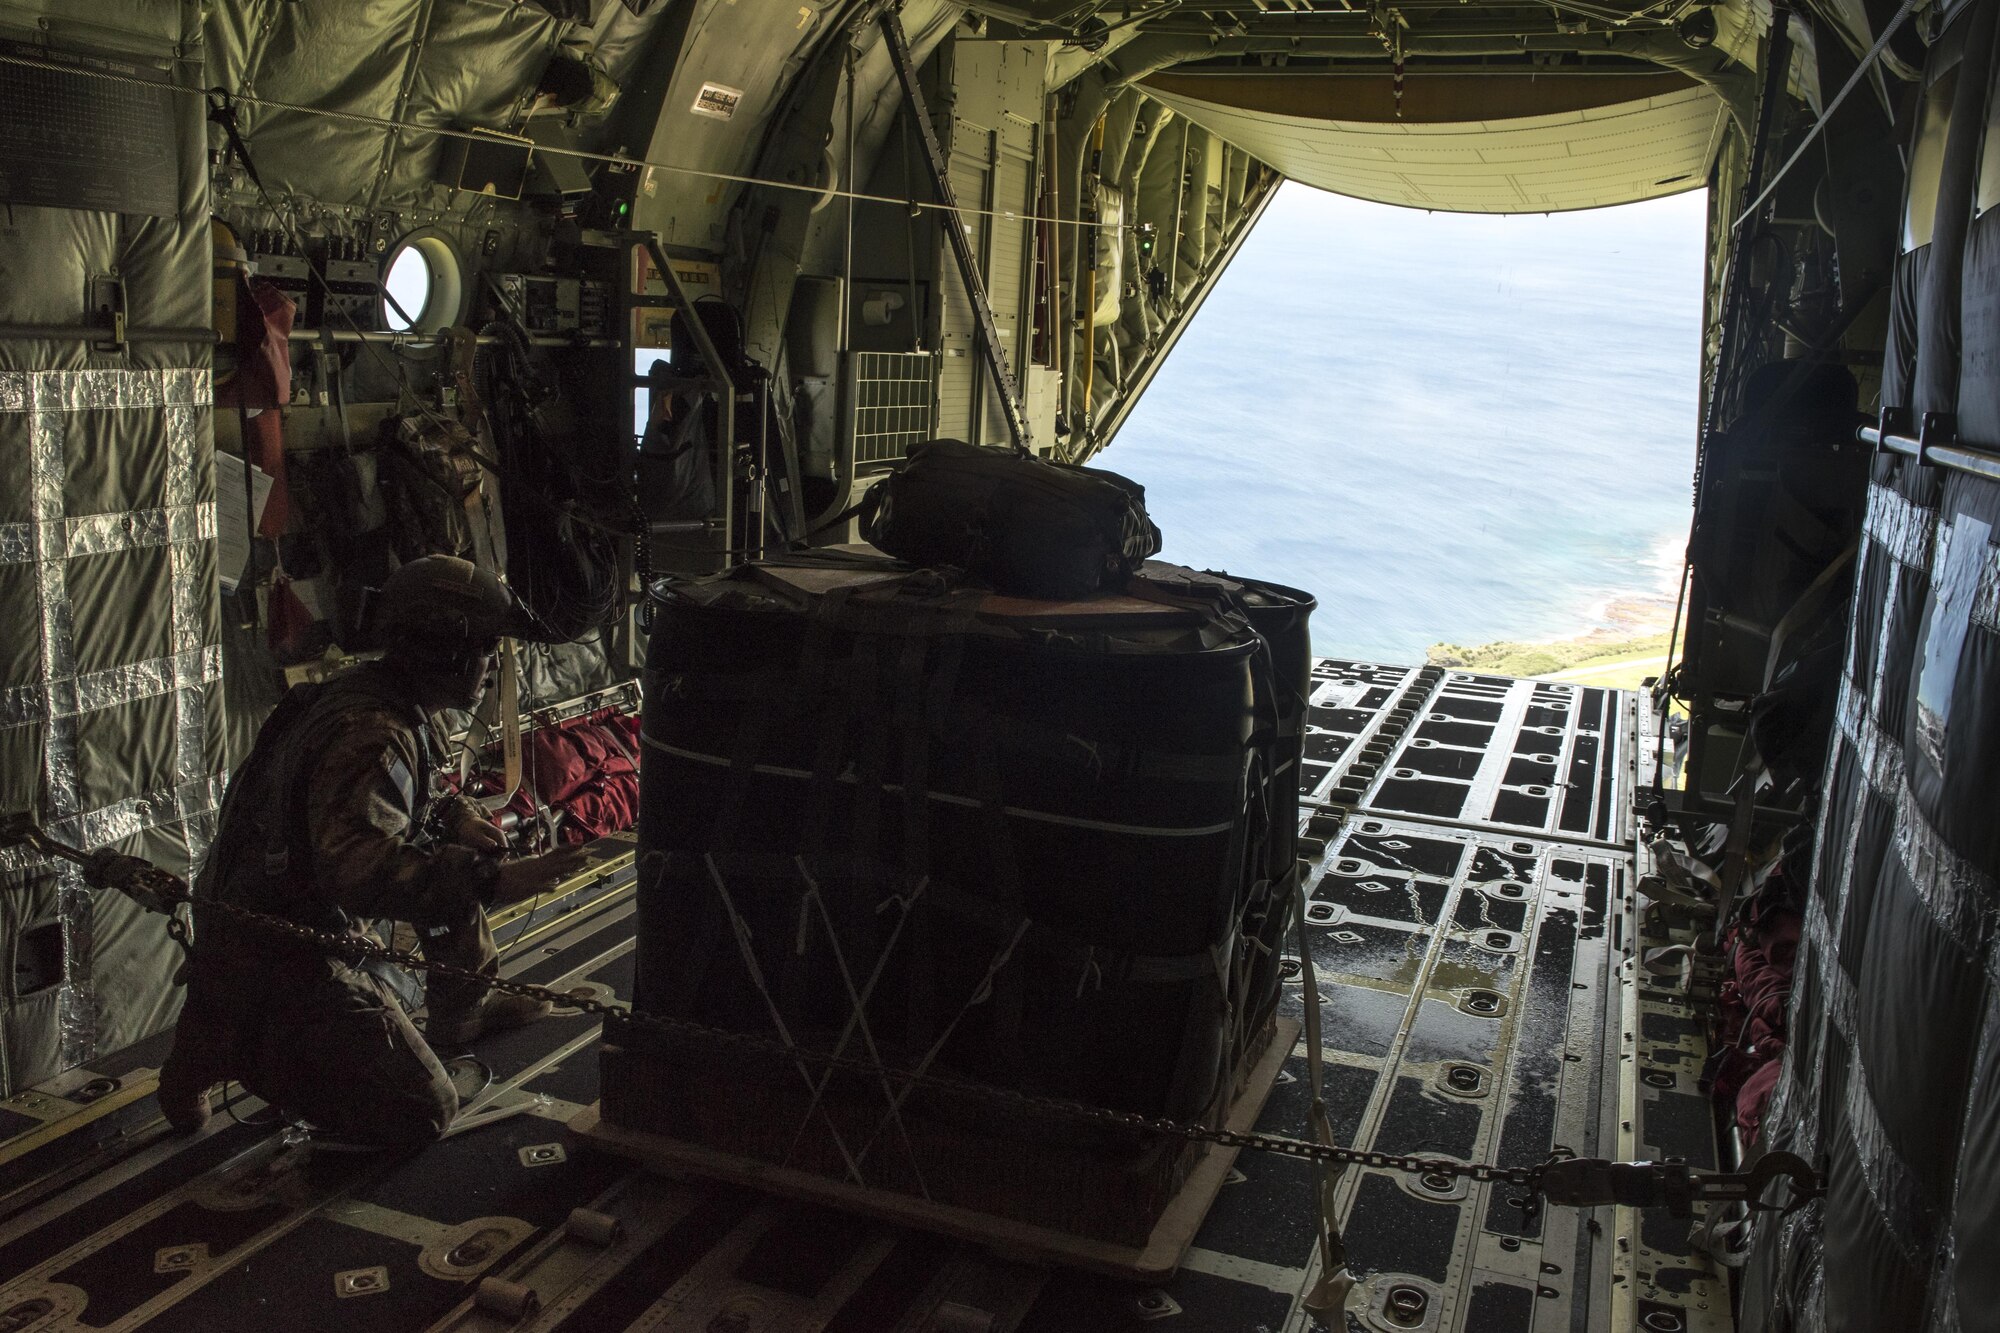 A U.S. Air Force MC-130J Commando II loadmaster from the 17th Special Operations Squadron prepares to airdrop a package onto Le Shima Range, Okinawa, Japan, during a mass launch training mission June 22, 2017. Aircrews must consider a number of variables in order to execute a precise and effective airdrop, to include wind speed, aircraft velocity, altitude, location and timing.  (U.S. Air Force photo by Senior Airman John Linzmeier)